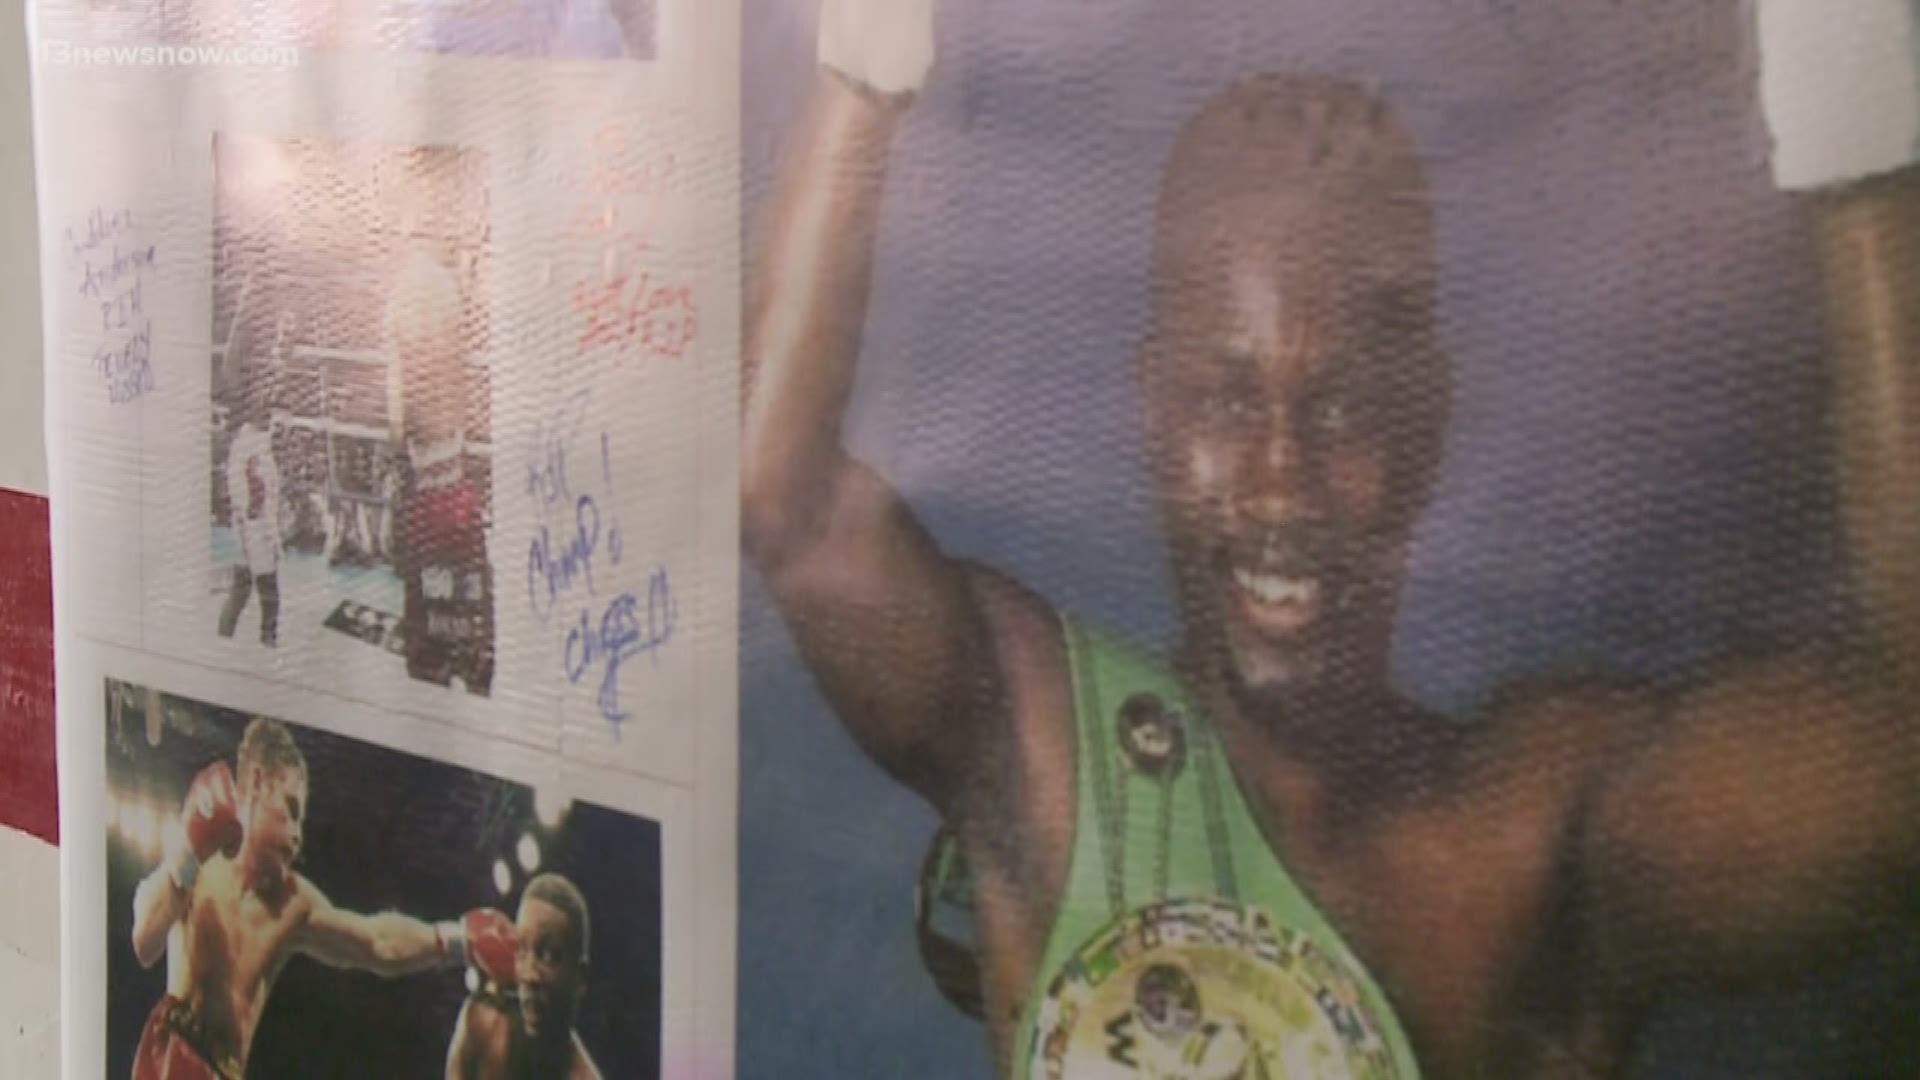 Nowhere else is Pernell "Sweet Pea" Whitaker's memory as well-loved and cherished than his home gym in Virginia Beach, owned by his nephew. "This is the heartbeat. This is where it really started, at and this is his real family," said Donald Bryant, his nephew.